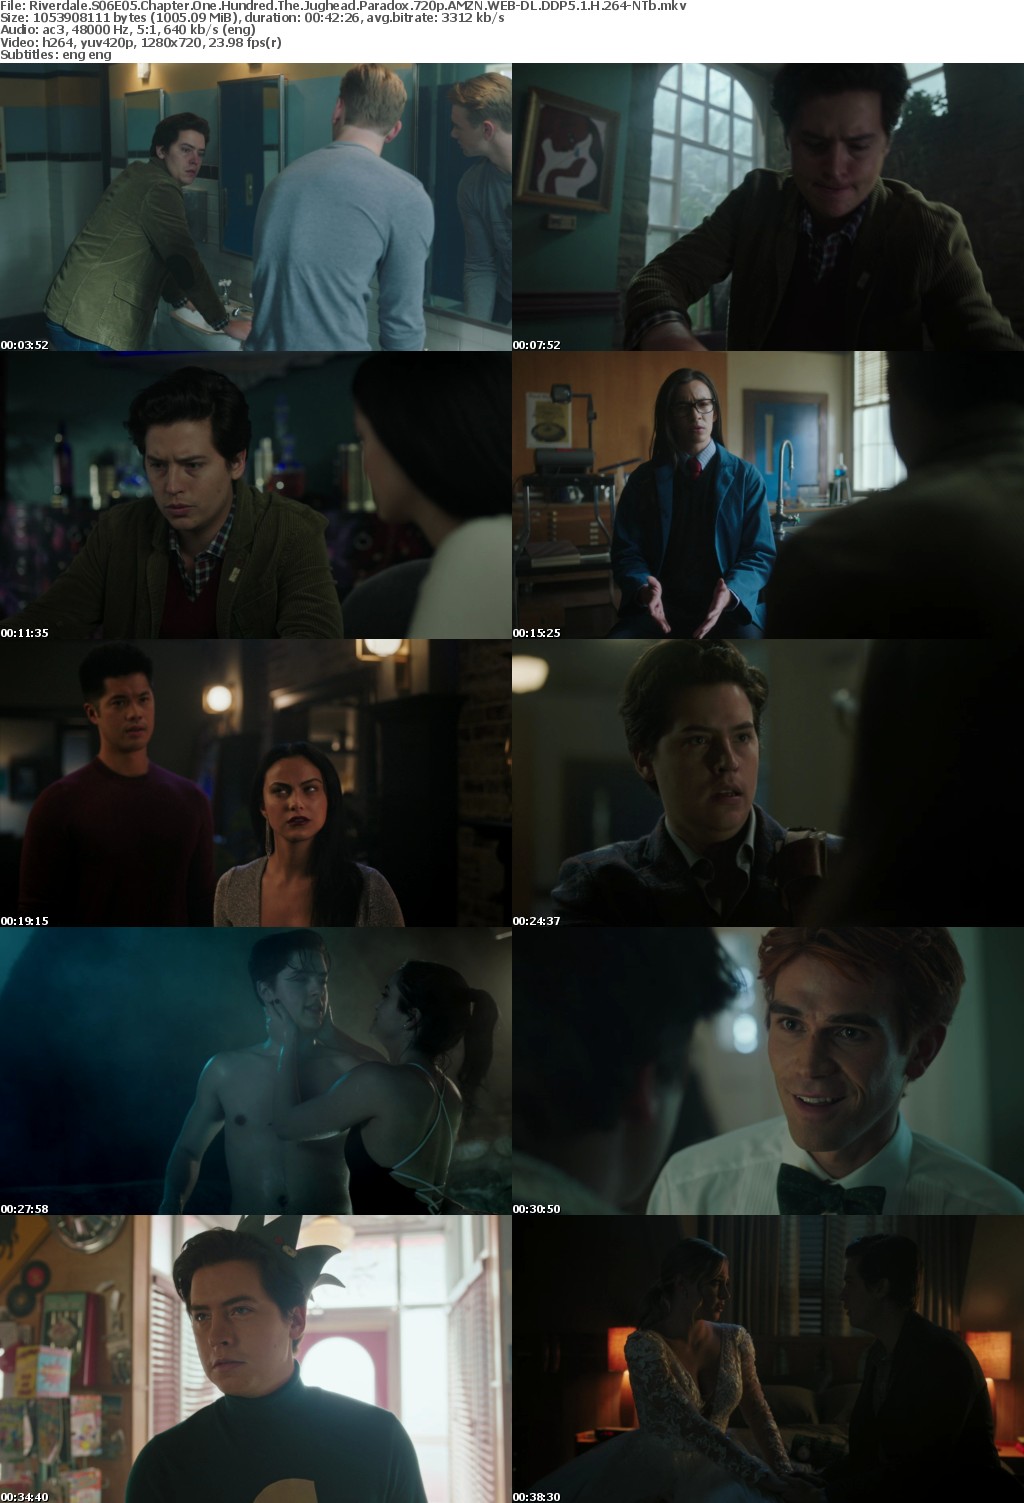 Riverdale US S06E05 Chapter One Hundred The Jughead Paradox 720p AMZN WEBRip DDP5 1 x264-NTb